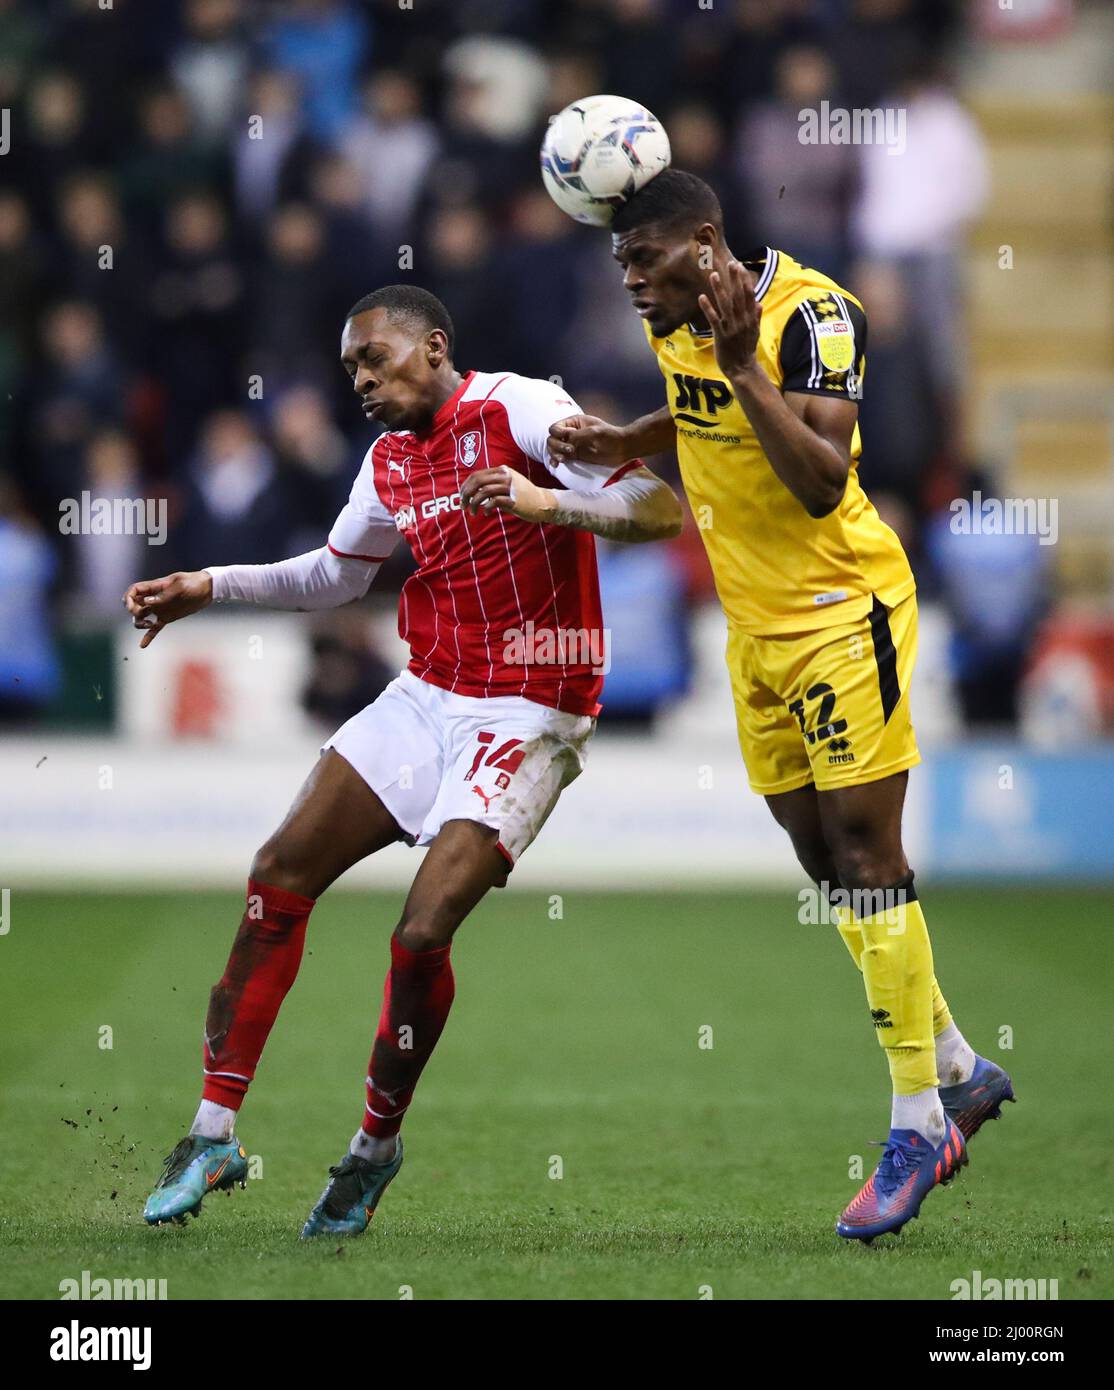 Rotherham United's Mickel Miller (left) Lincoln City’s TJ Eyoma battle for the ball during the Sky Bet League One match at the AESSEAL New York Stadium, Rotherham. Picture date: Tuesday March 15, 2022. Stock Photo